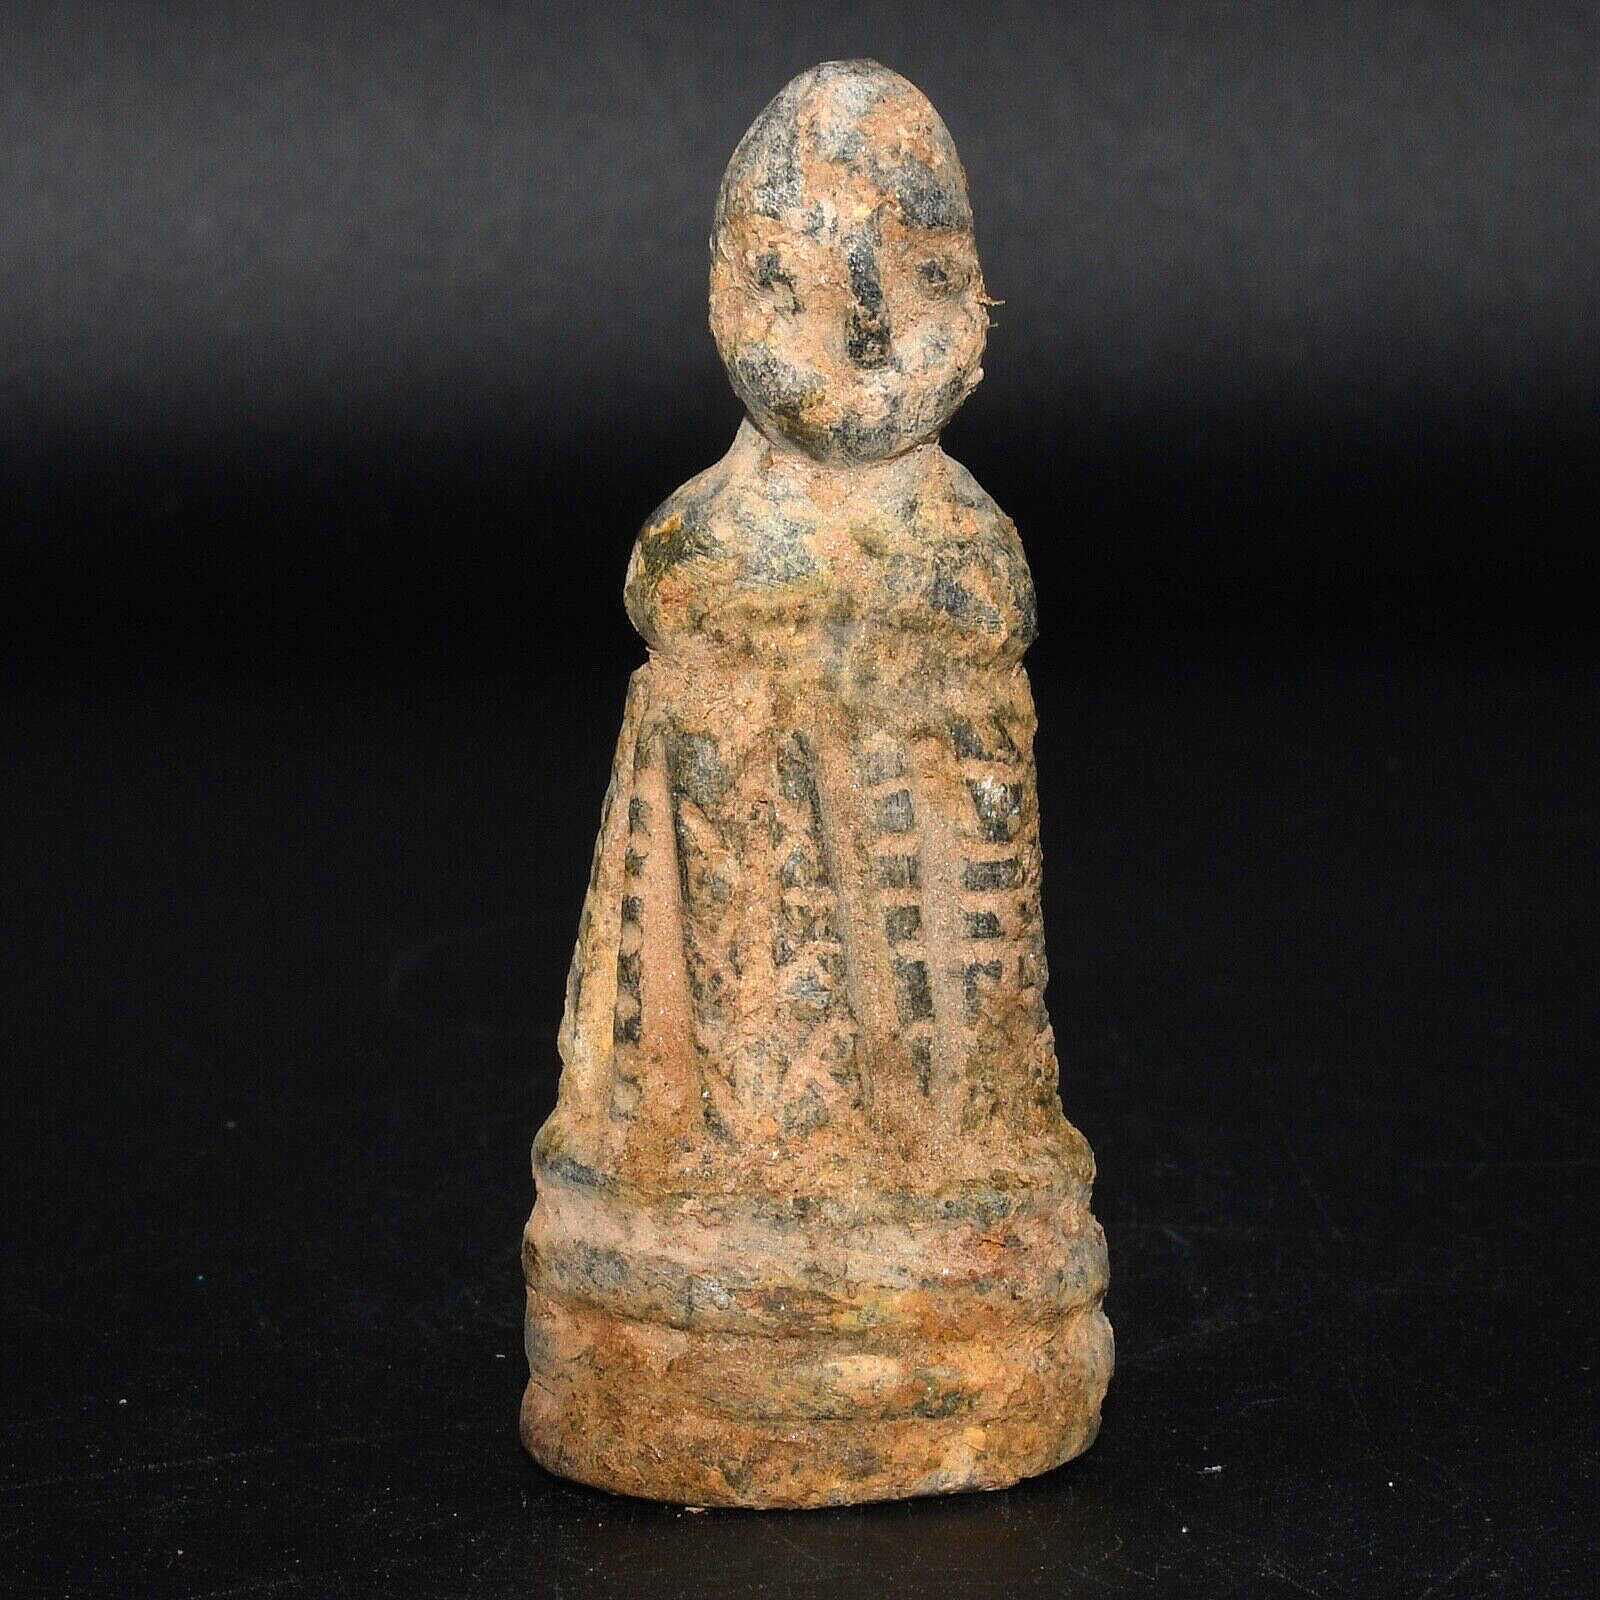 Ancient Bactrian Stone Statue Figurine with Engravings Circa 2500 - 1500 BC